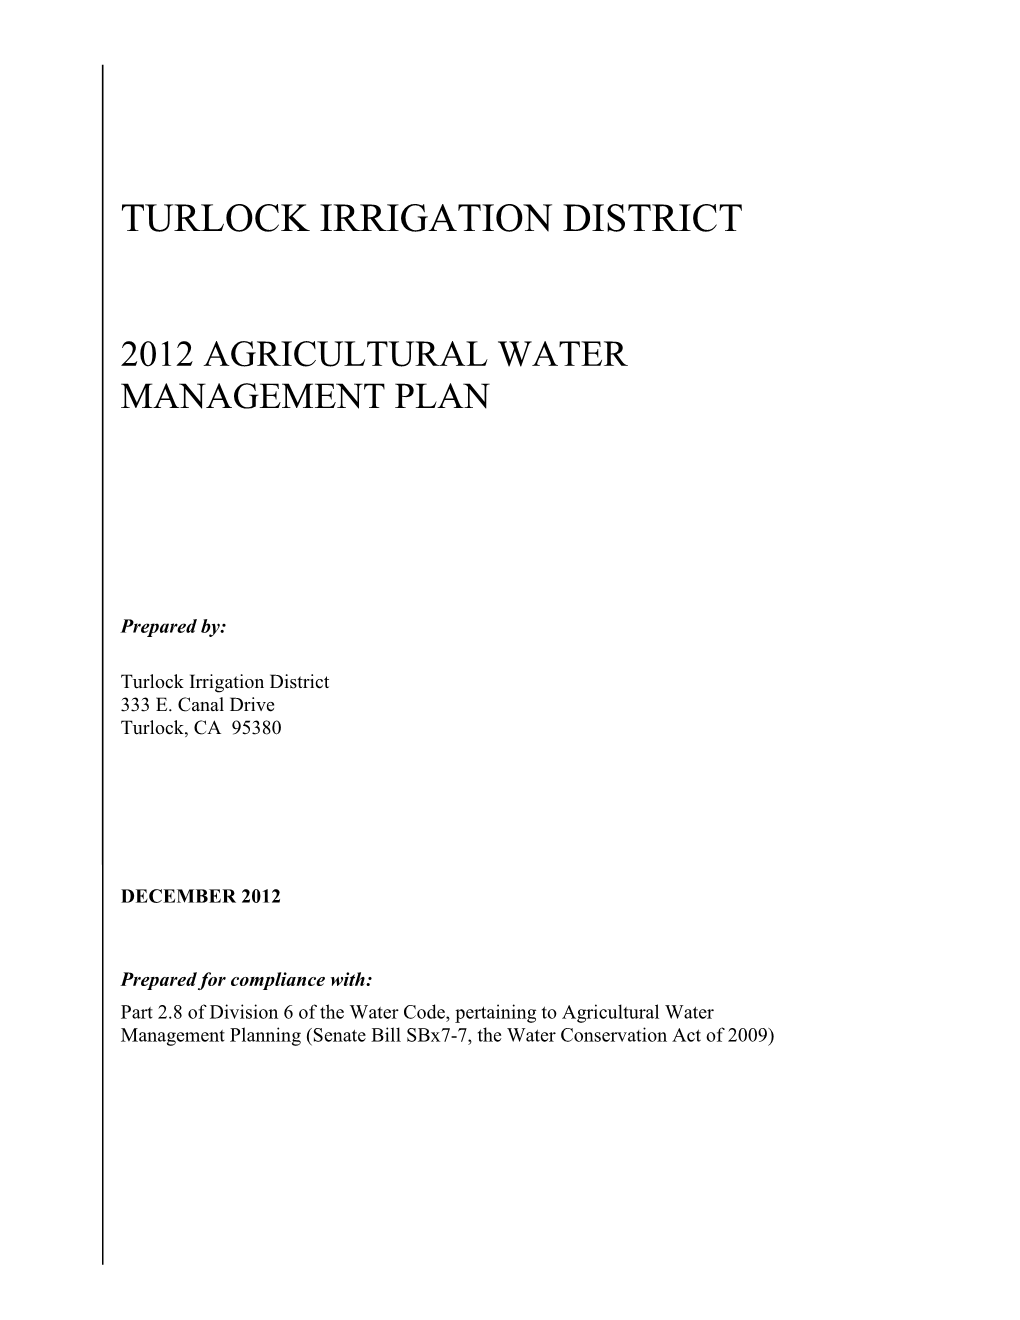 2012 Agricultural Water Management Plan